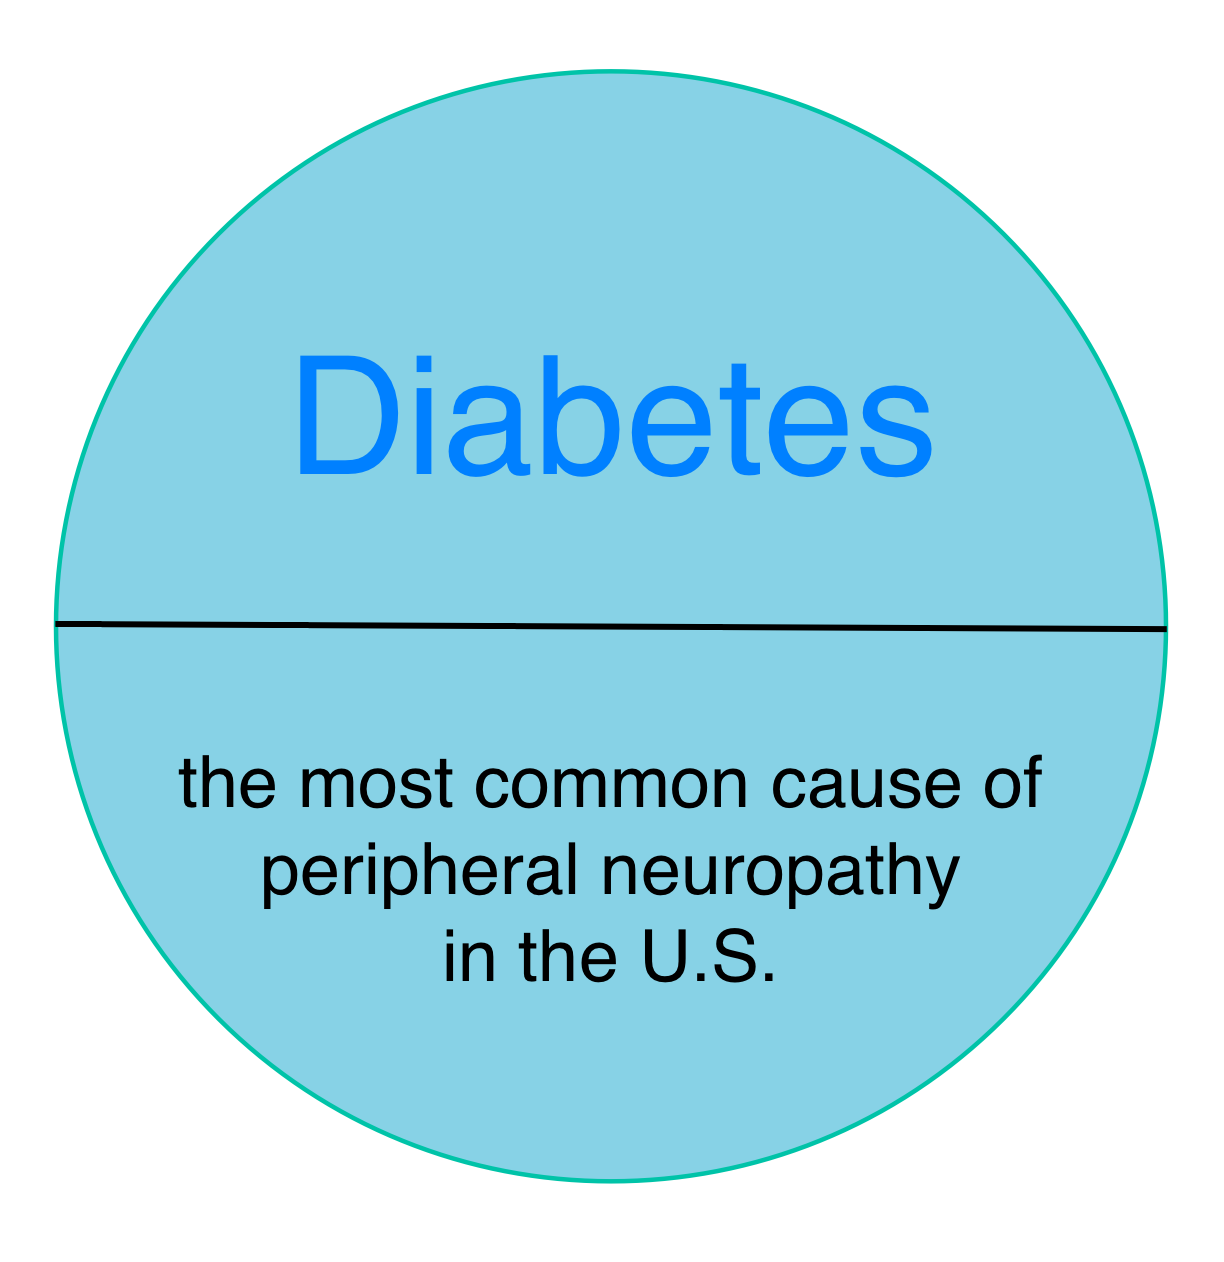 graphic showing diabetes as the most common cause of peripheral neuropathy